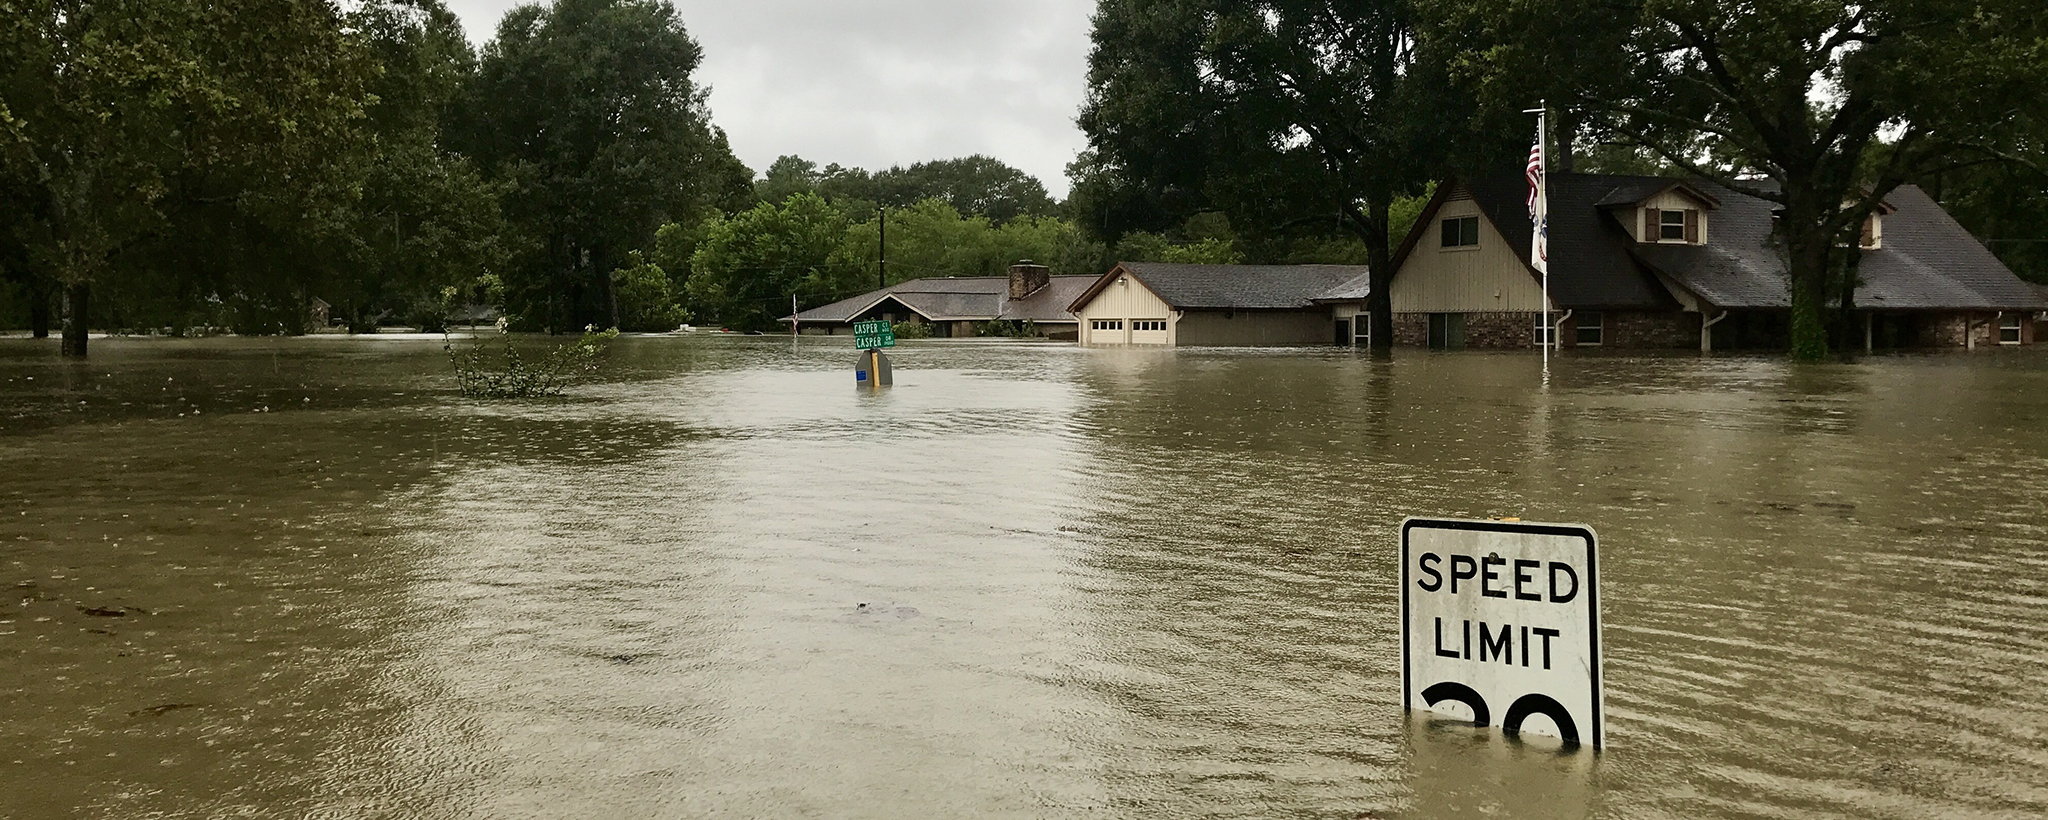 Flooded neighborhood. Flood waters cover a speed limit sign, houses in the background. 